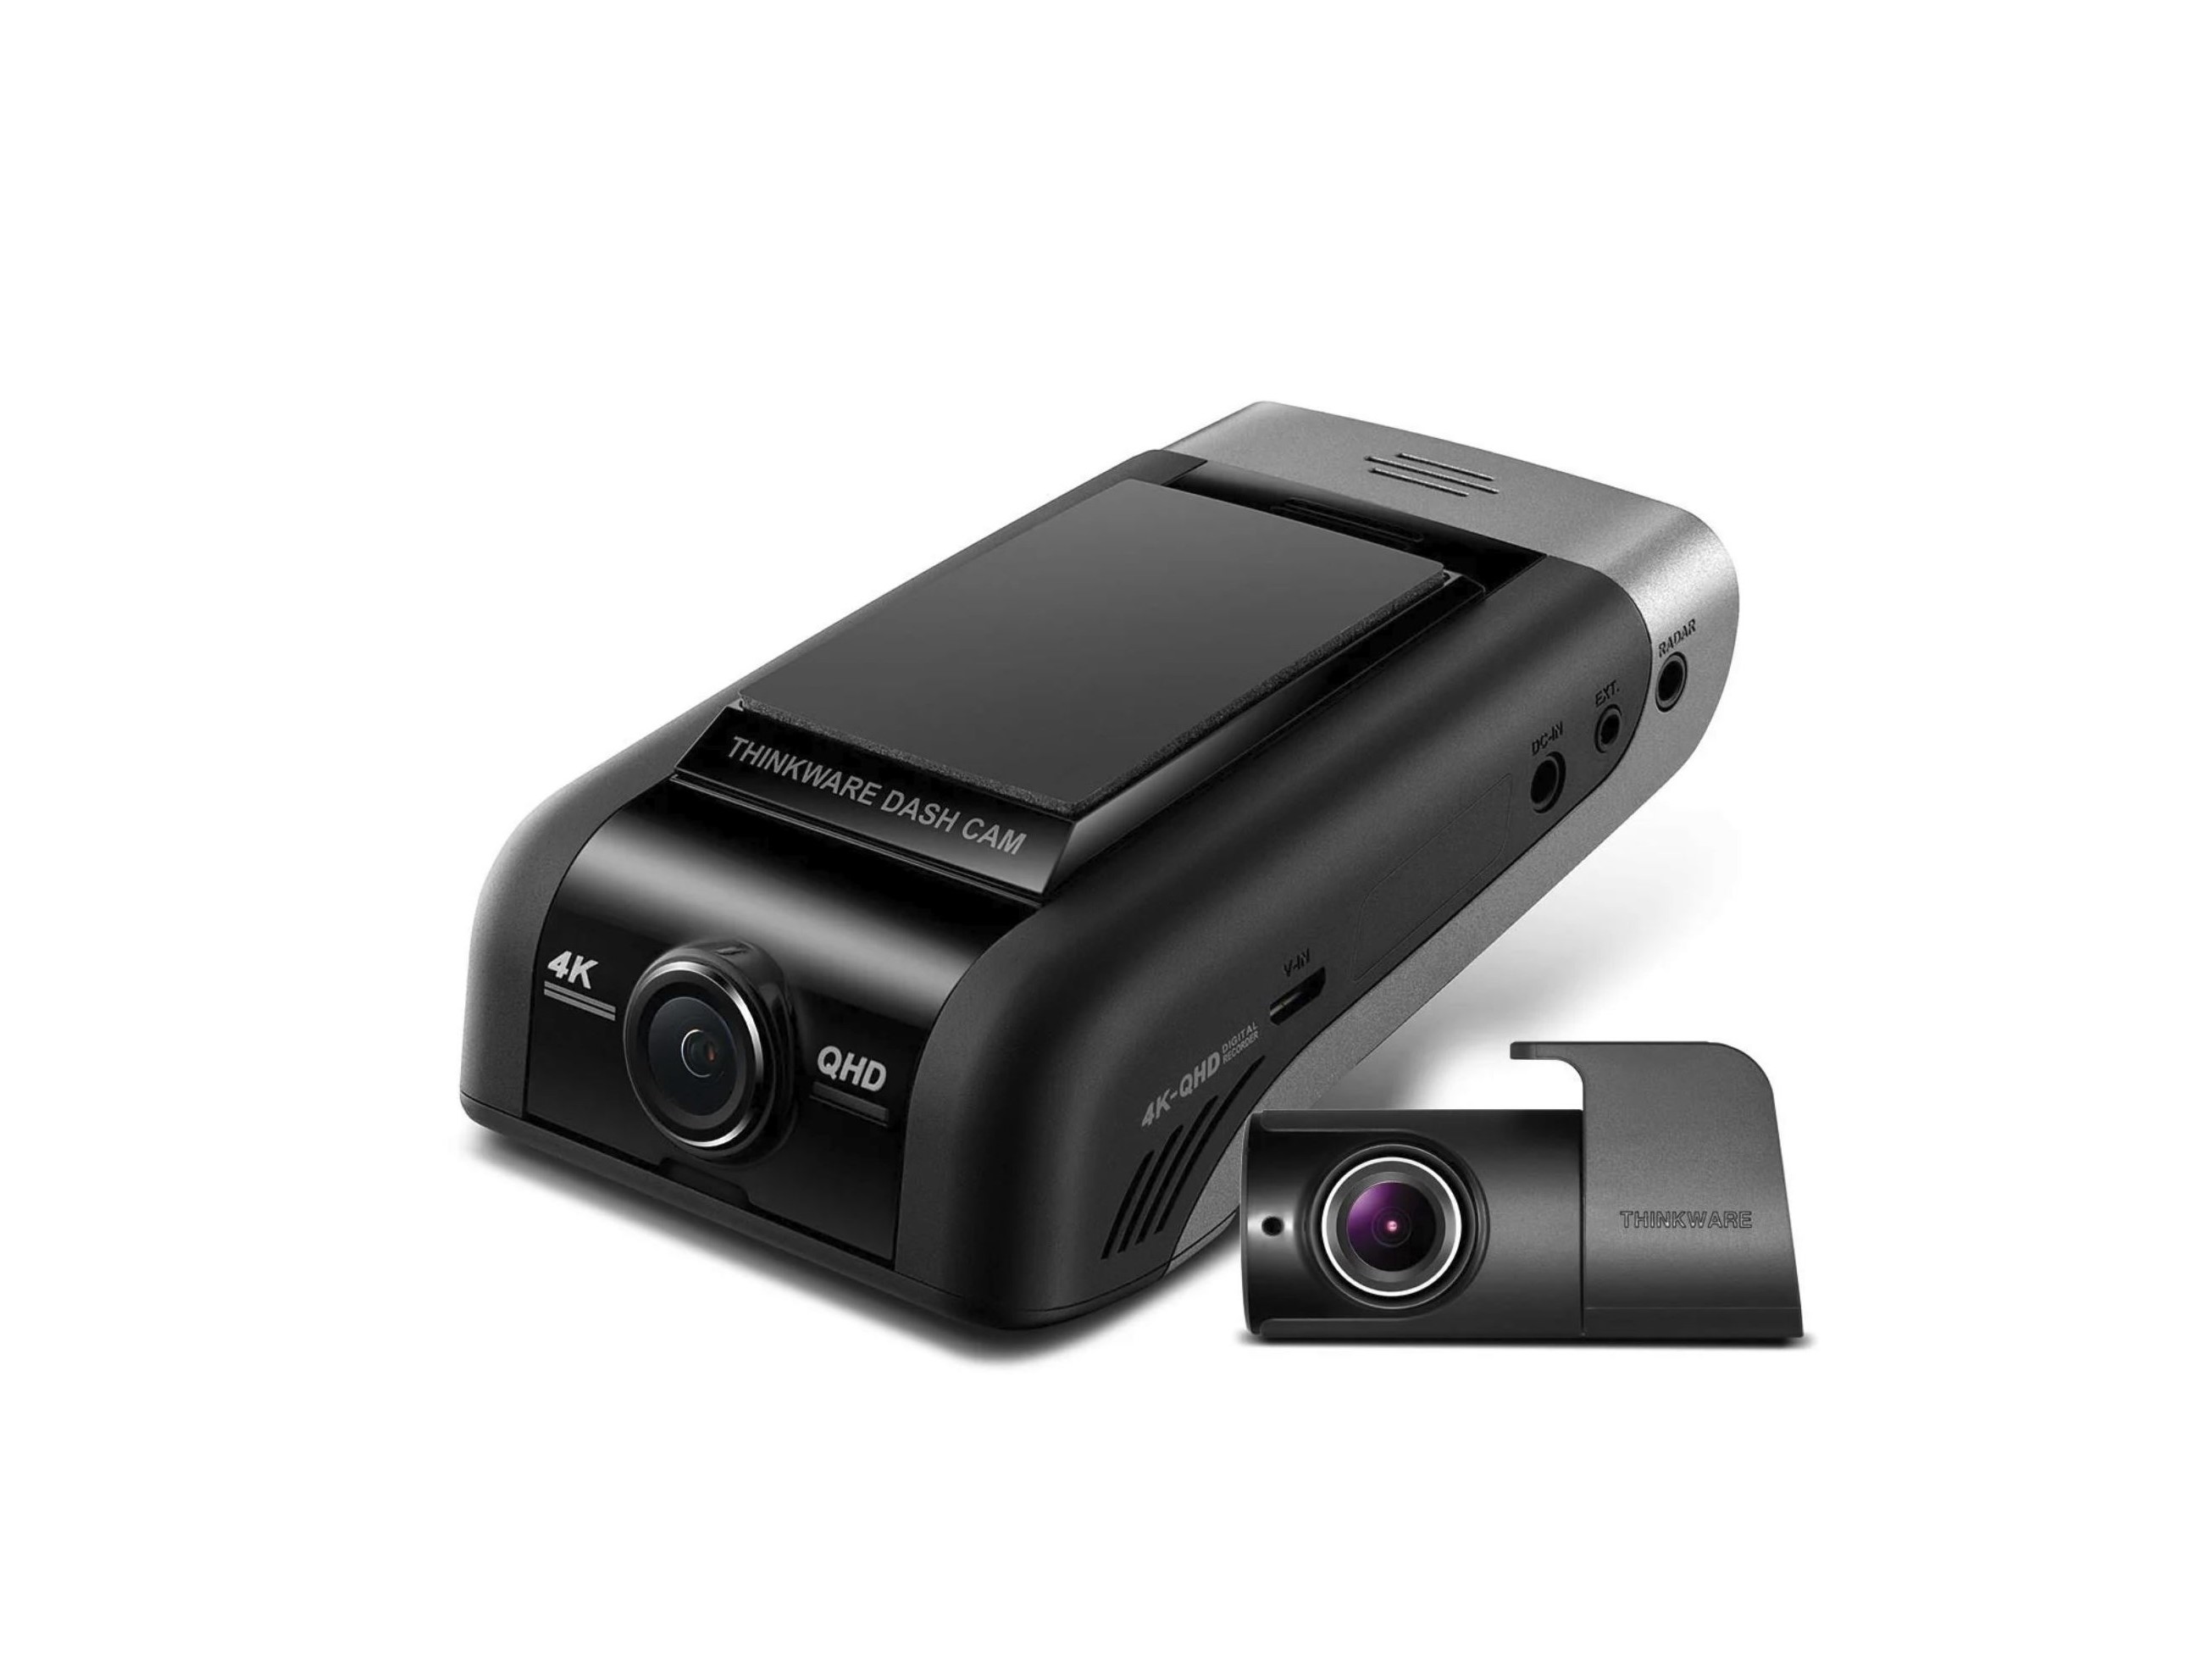 Goodts dash cam with 16GB memory card for $25 - Clark Deals